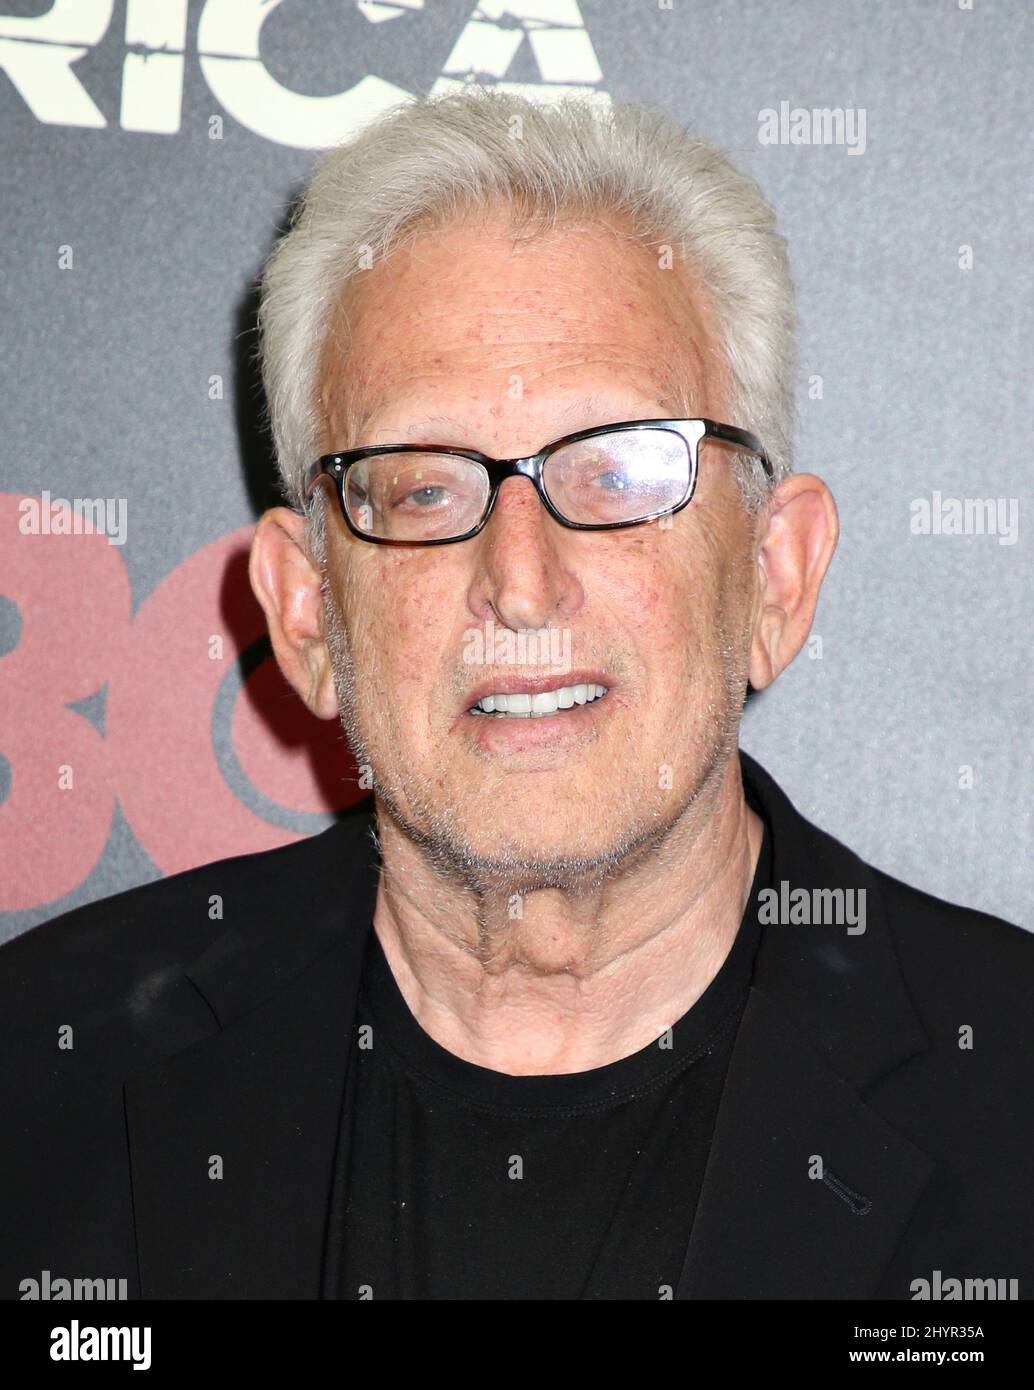 Joe Roth attending HBO's 'The Plot Against America' New York Premiere held at Florence Gould Hall on March 4, 2020 in New York City Stock Photo